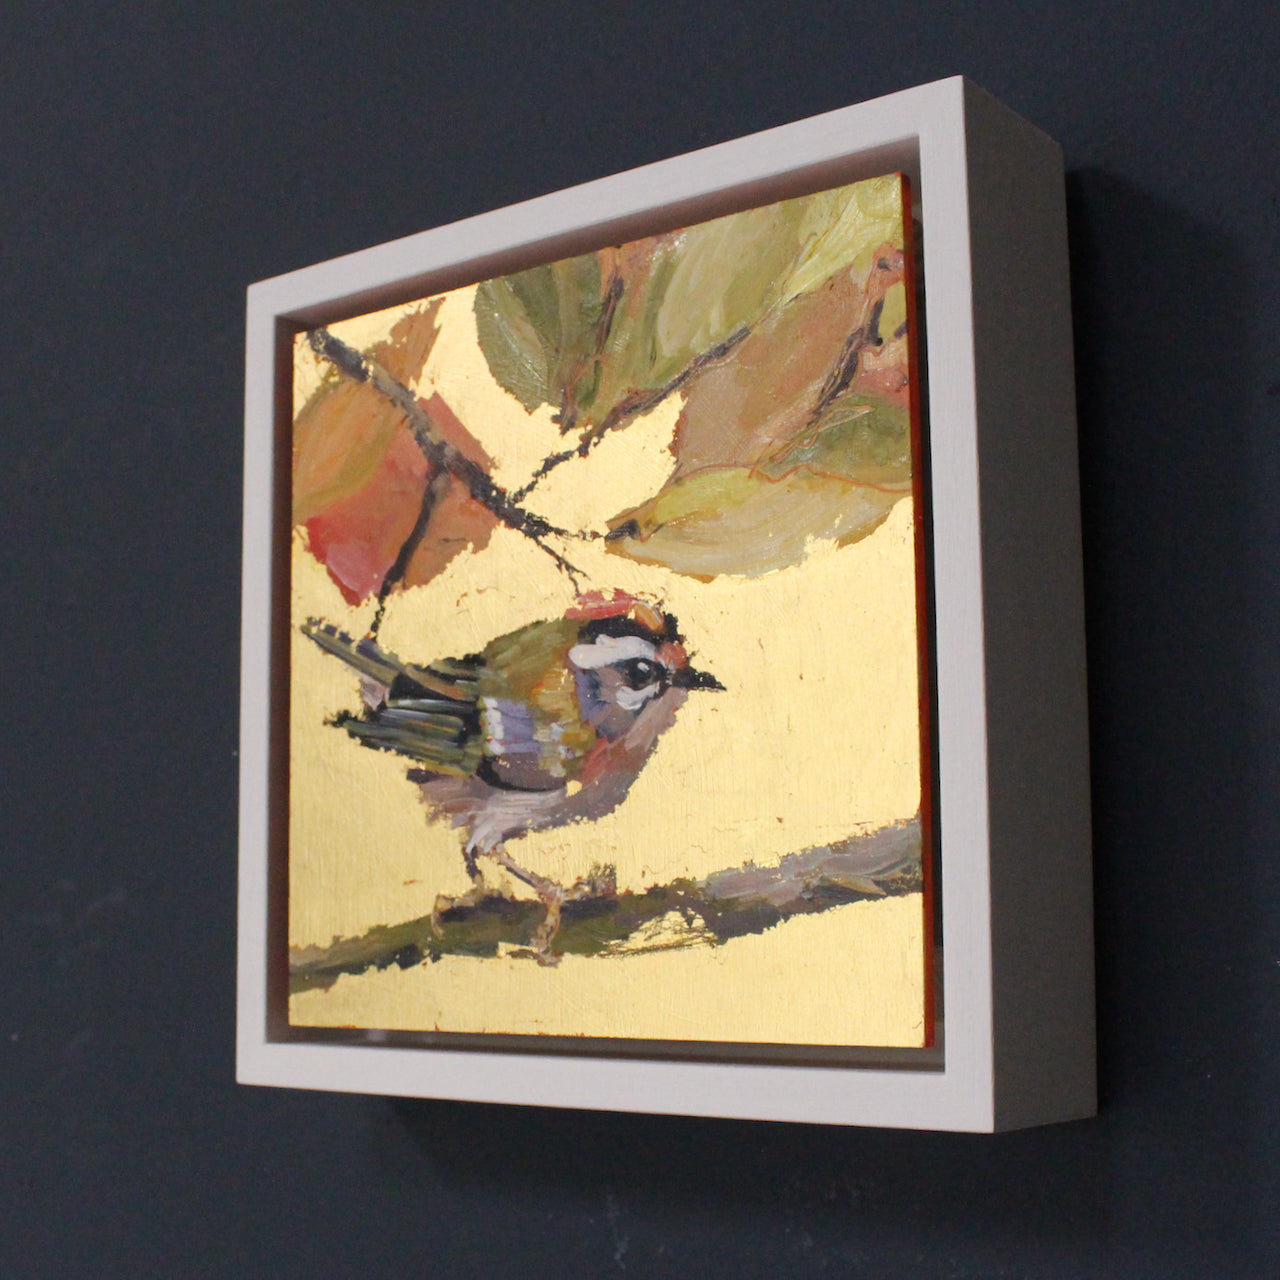 a framed Jill Hudson painting of a firecrest bird on branch in foreground and brown & green leaves.